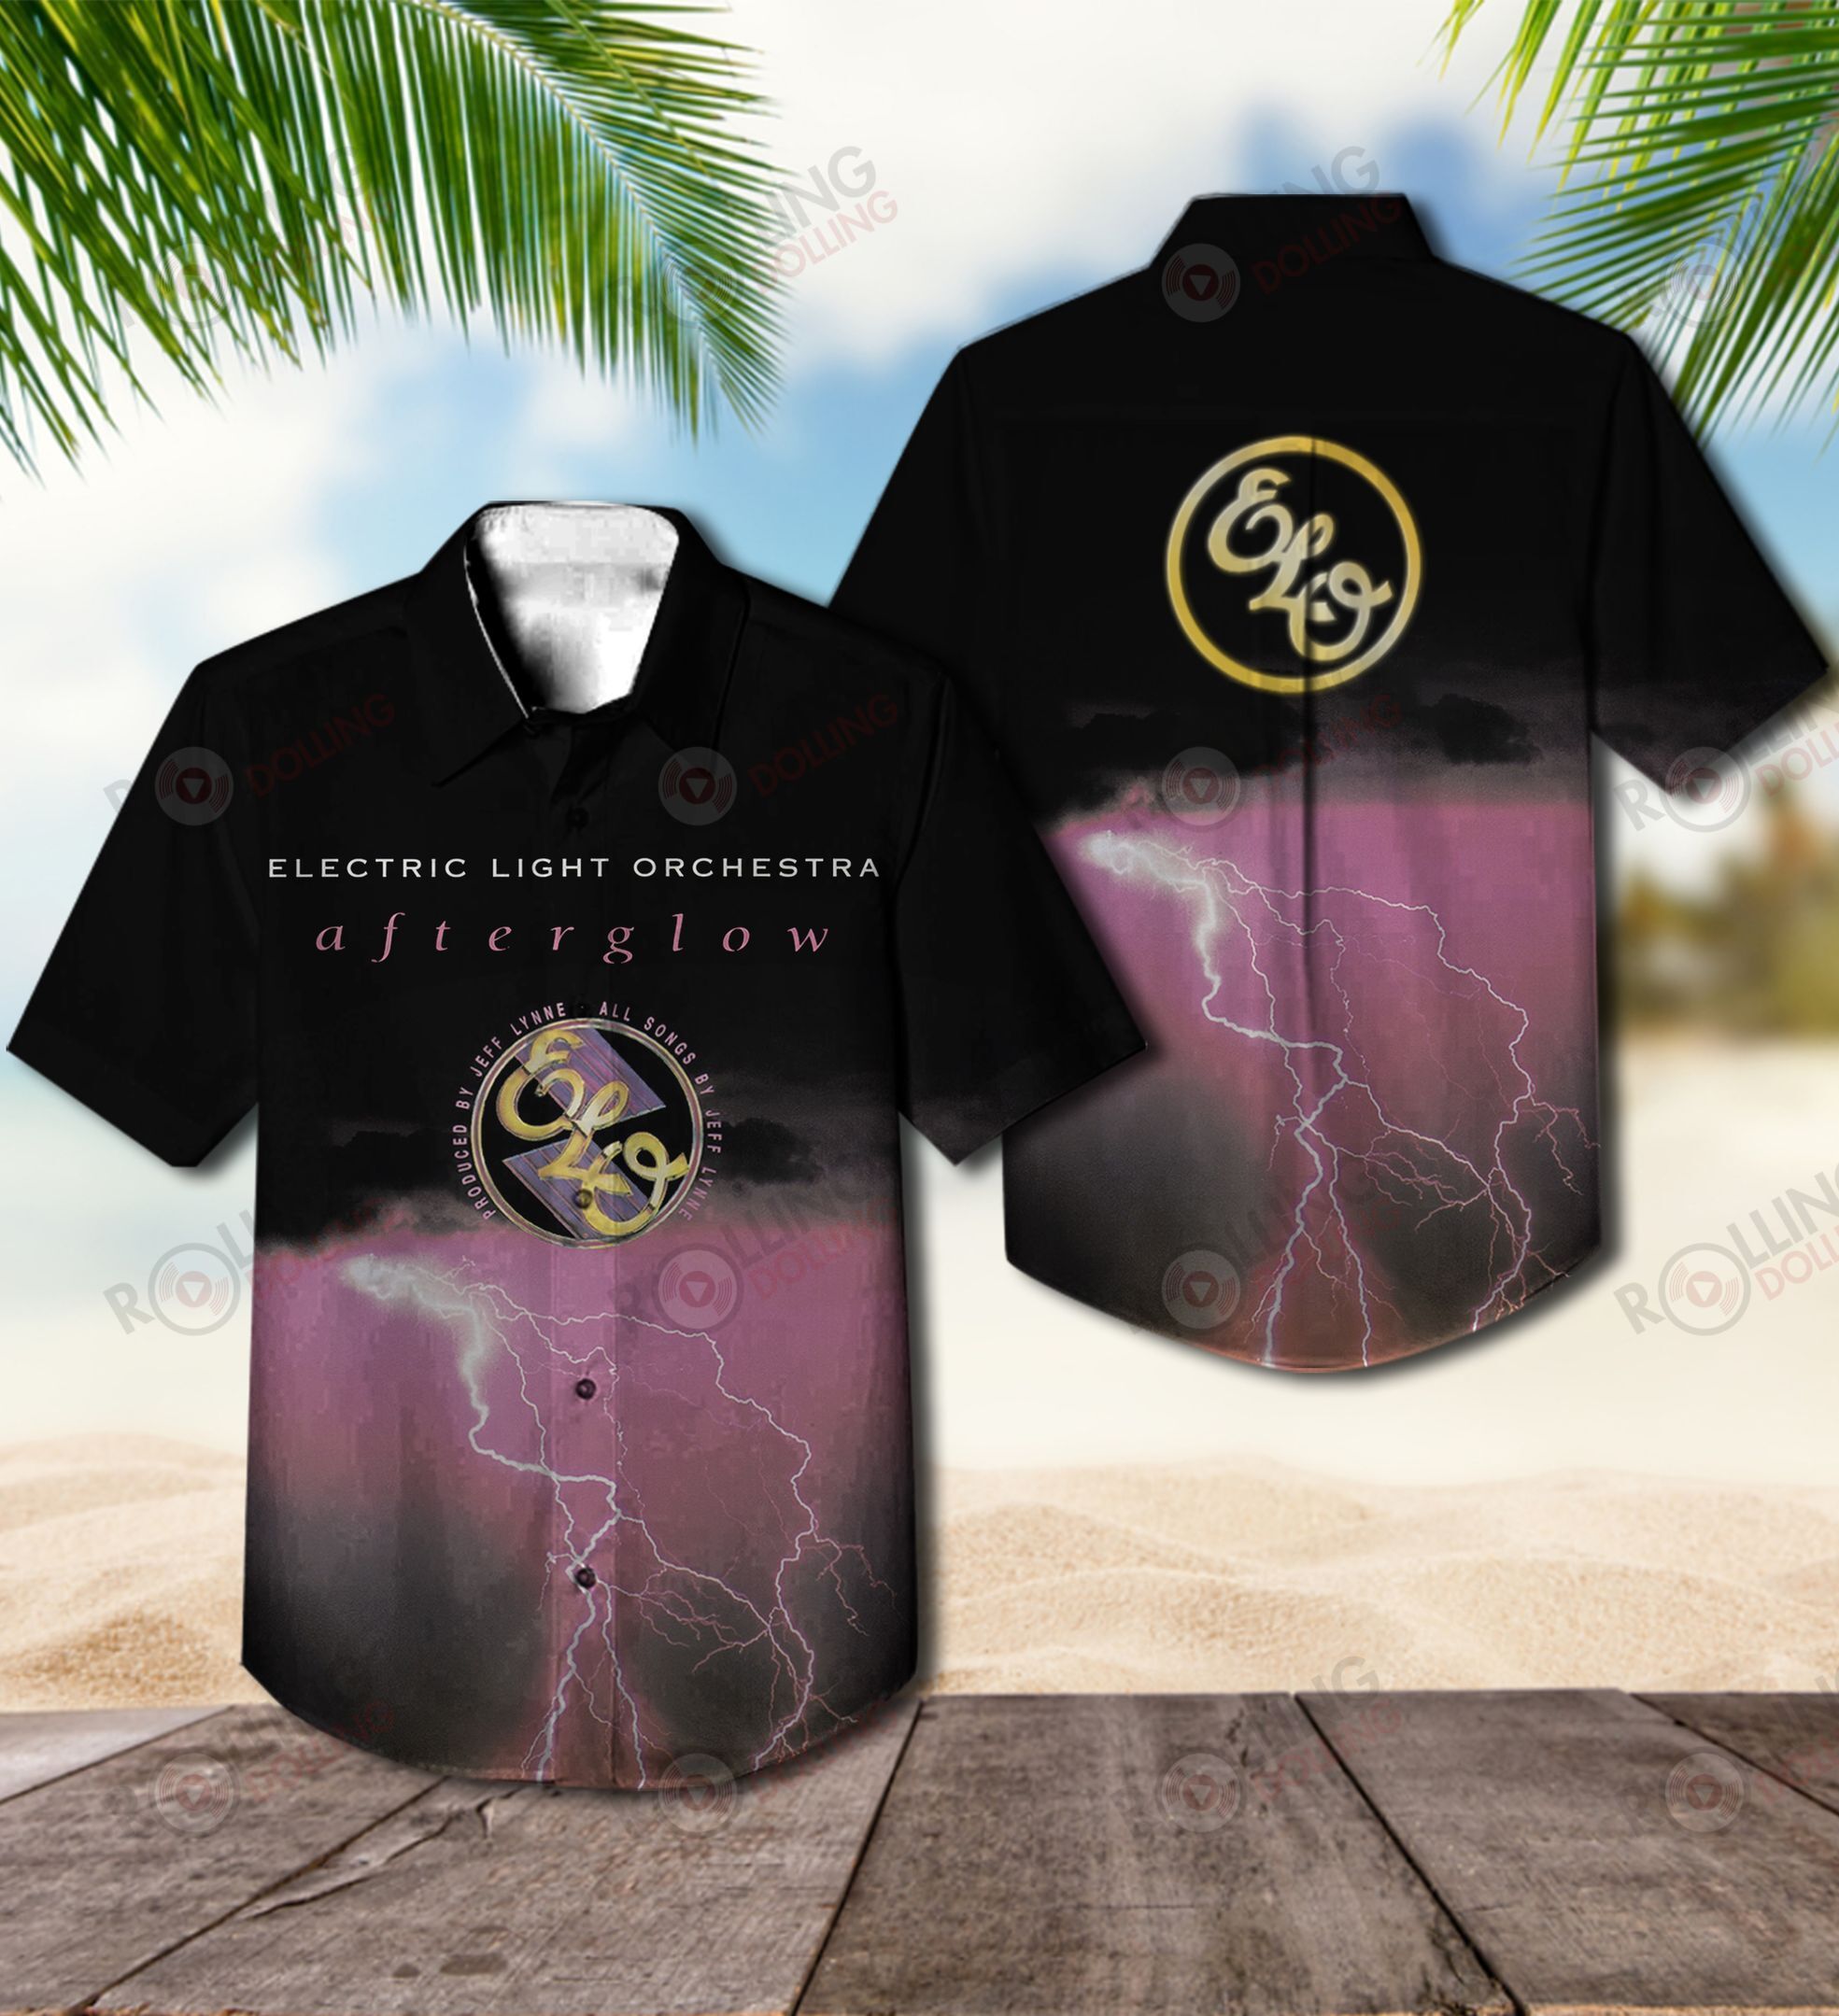 The Hawaiian Shirt is a popular shirt that is worn by Rock band fans 9